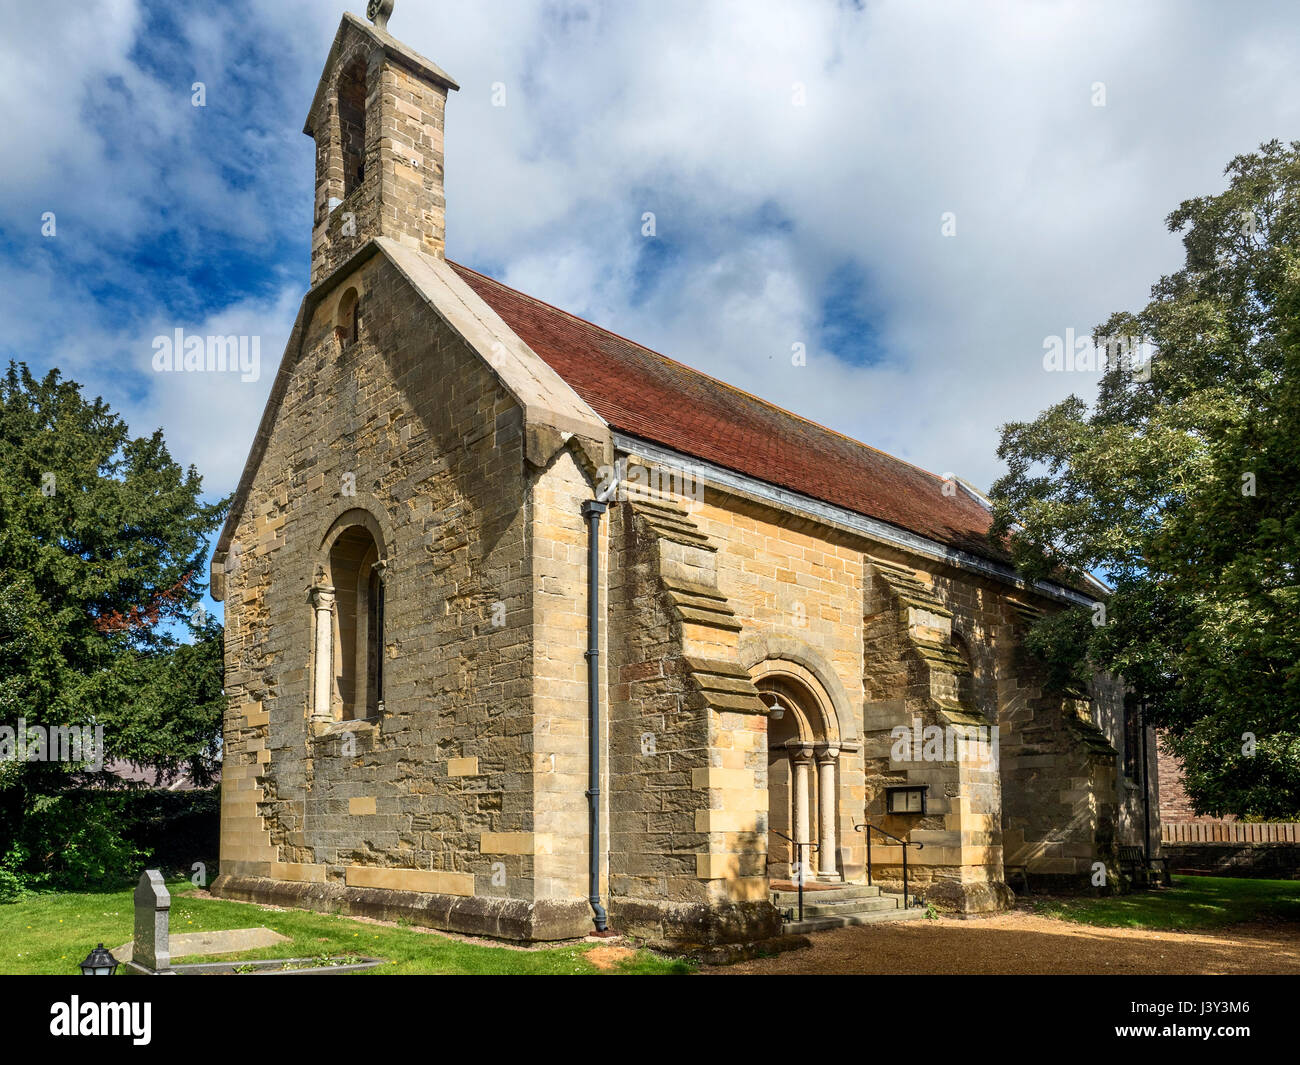 The Neo Norman Churches Conservation Trust Church of St Mary at Roecliffe near Boroughbridge Yorkshire England Stock Photo